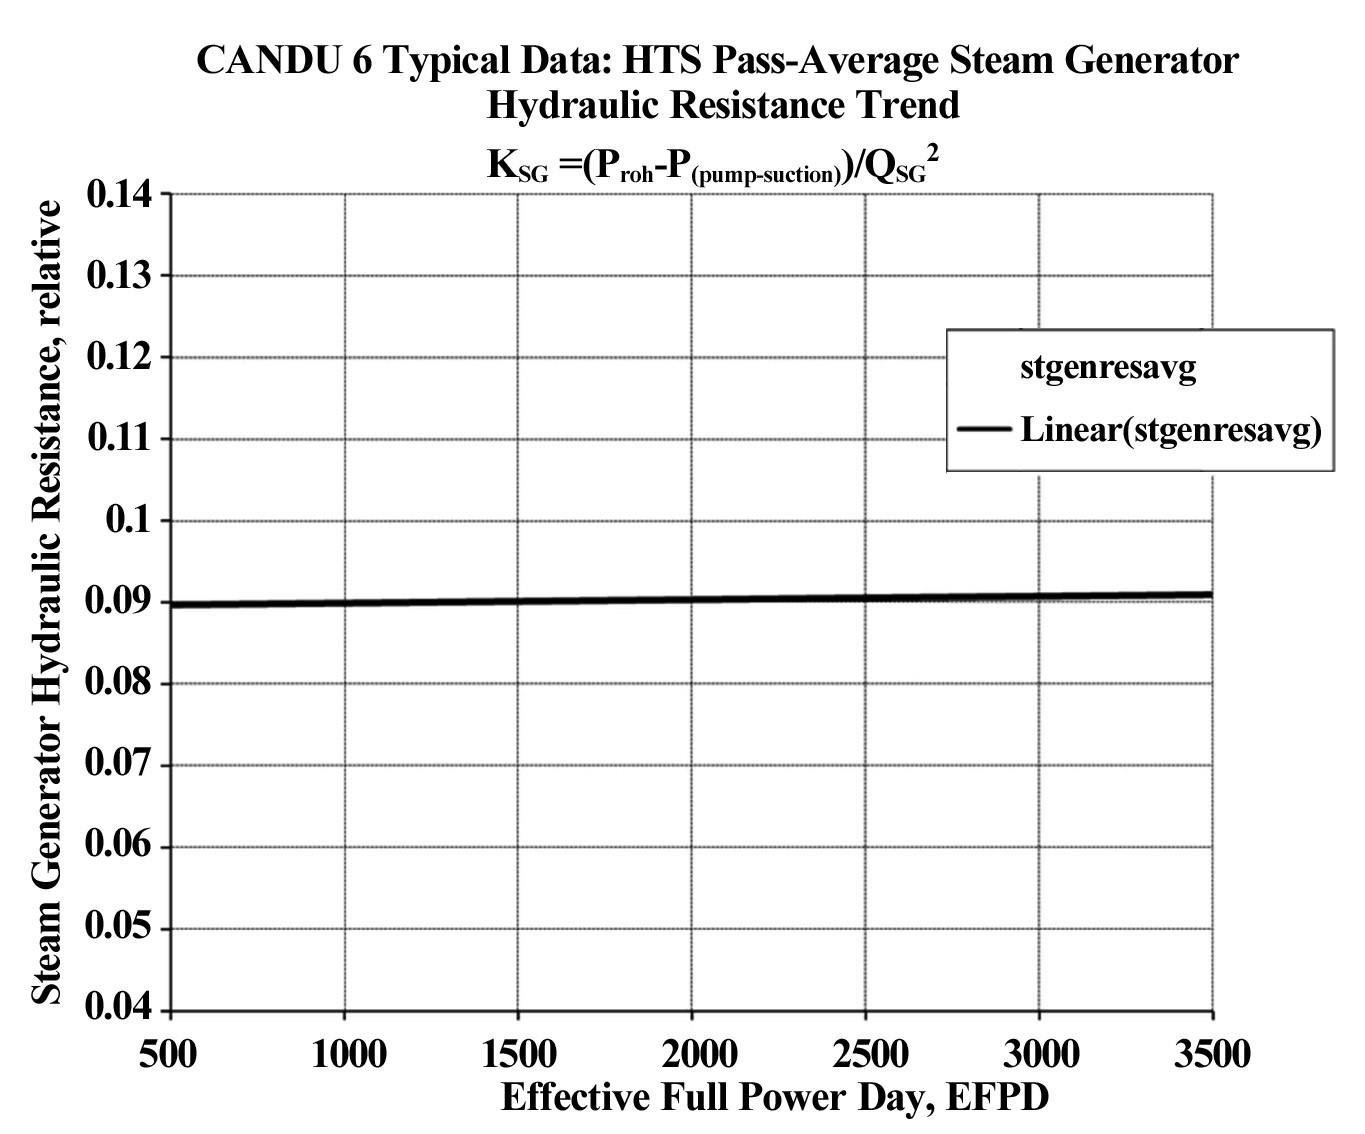 Steam Generator Hydraulic Resistance Trend for Improved CANDU-6 Plants